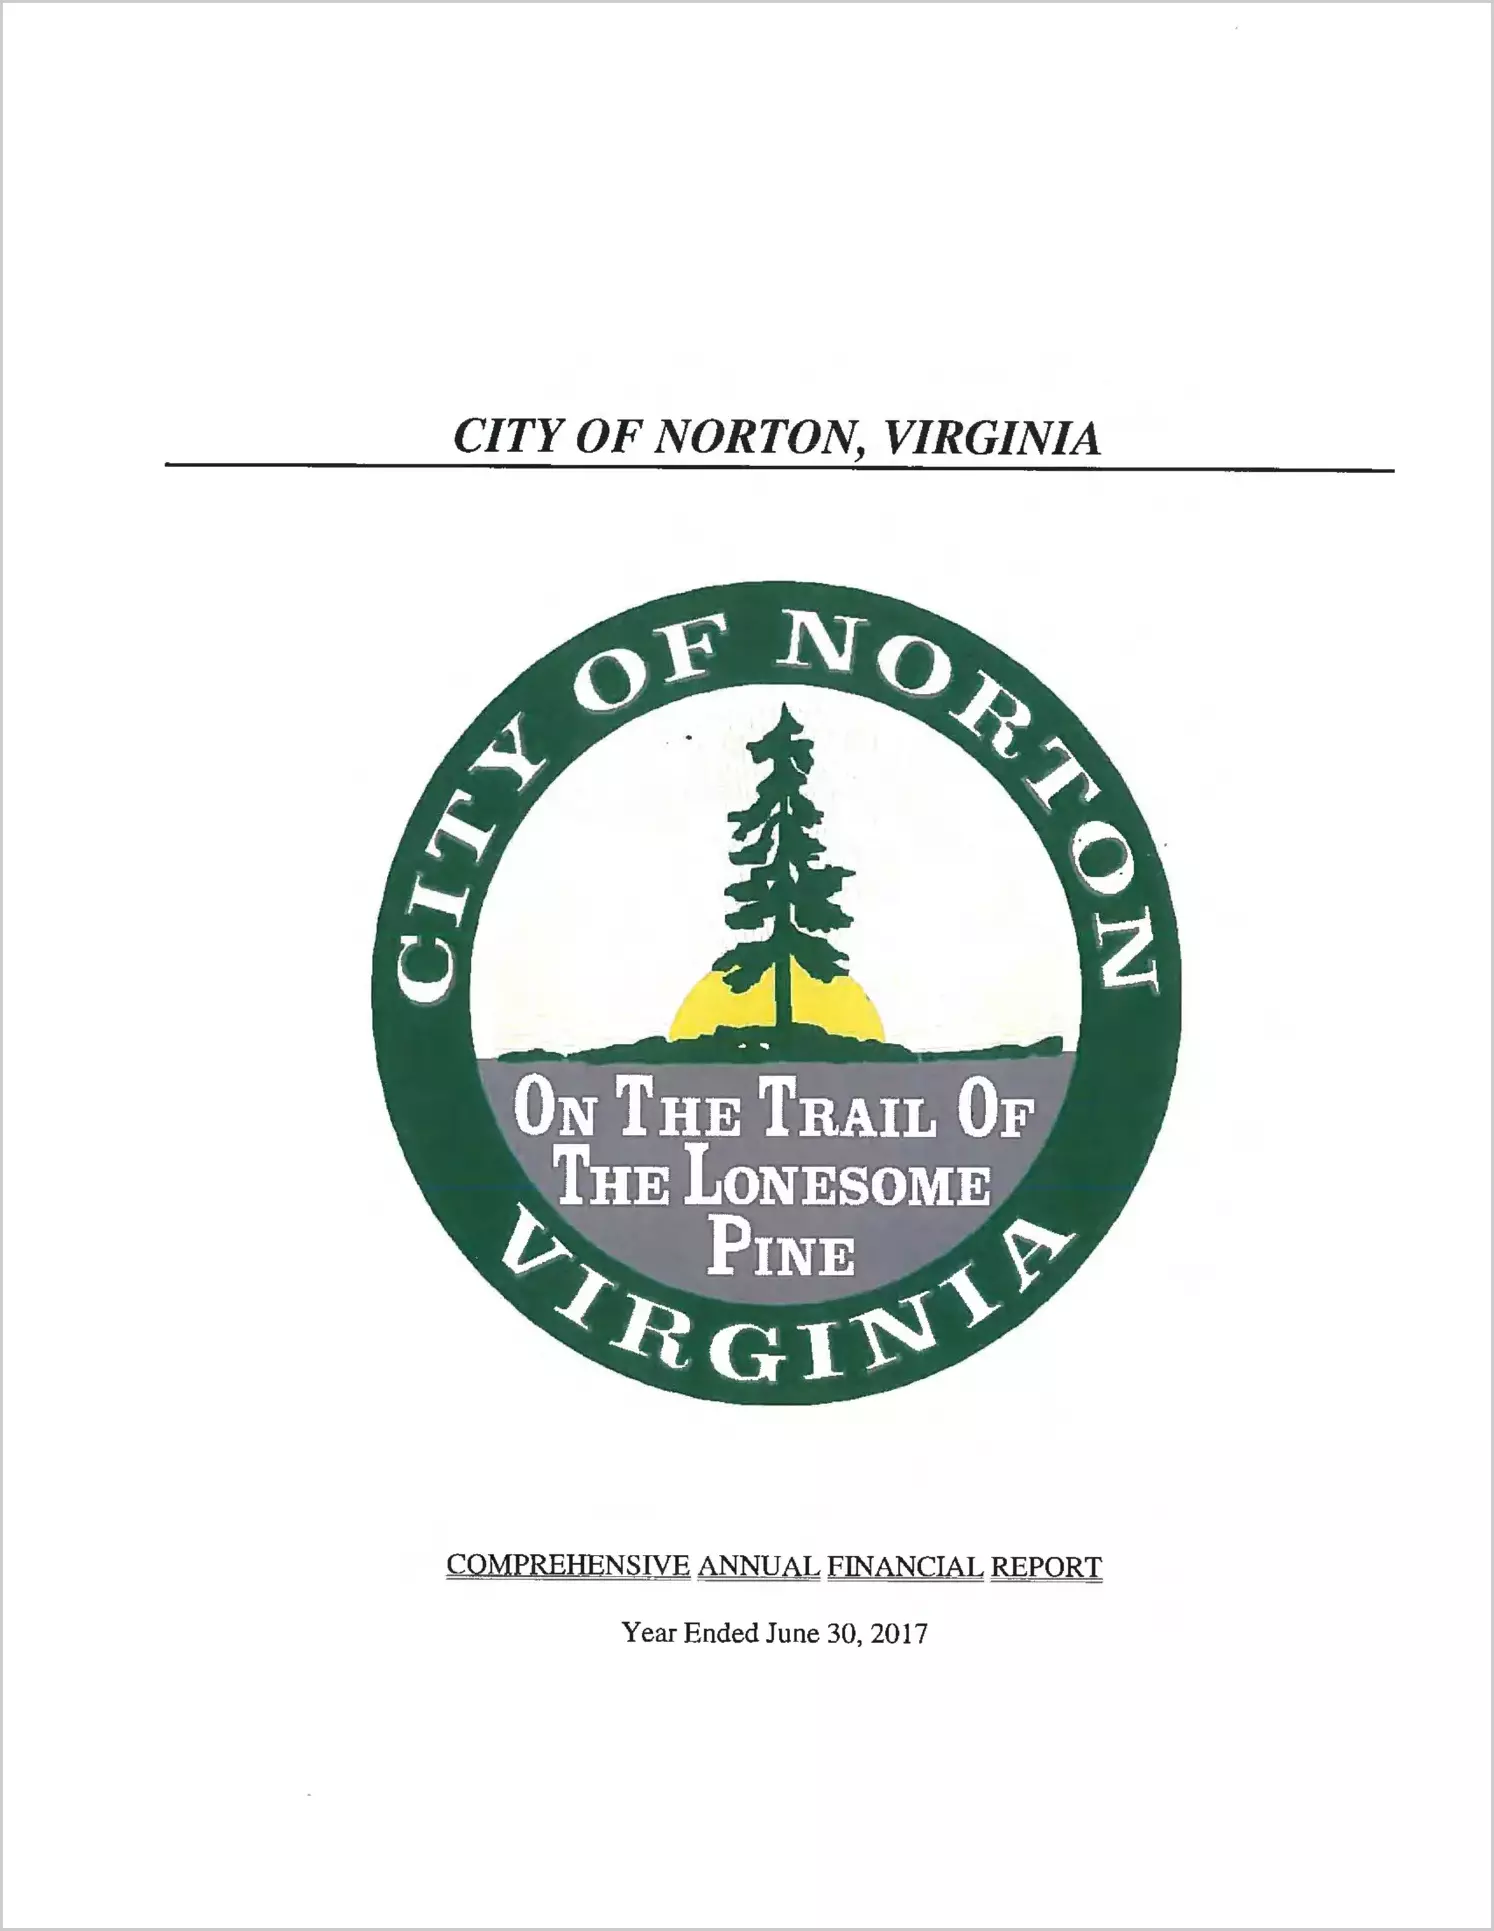 2017 Annual Financial Report for City of Norton